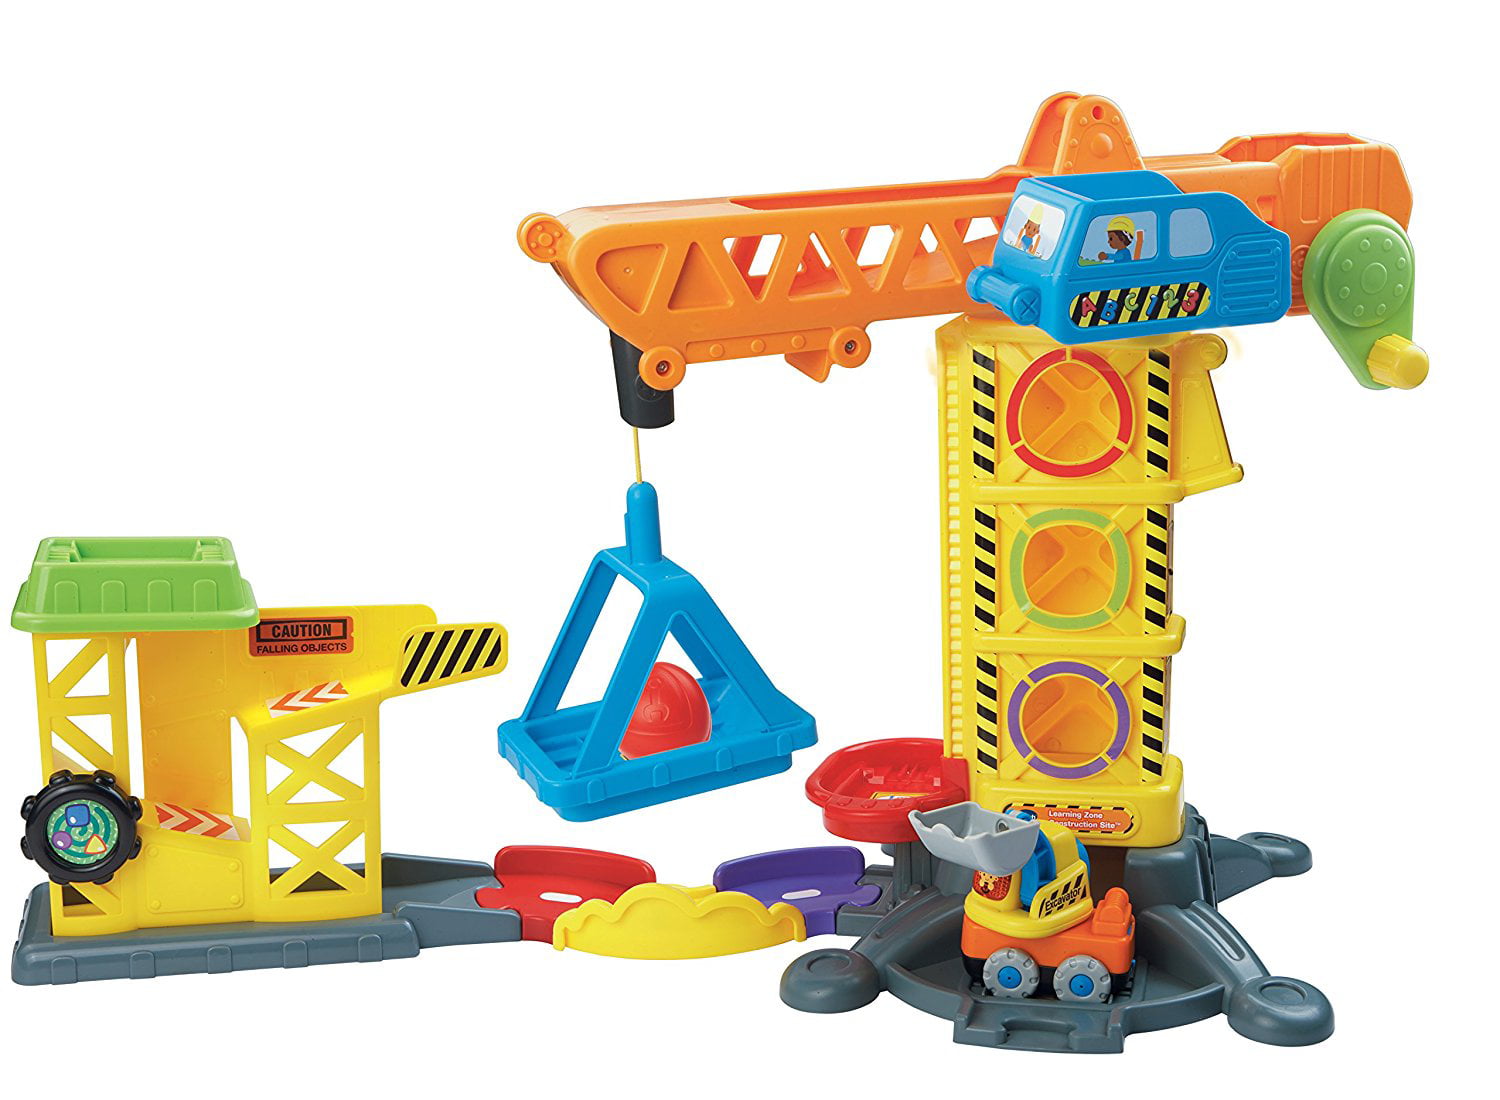 VTech Smart Wheels Learning Zone Construction Site toddler toys kids 1 to 5 year